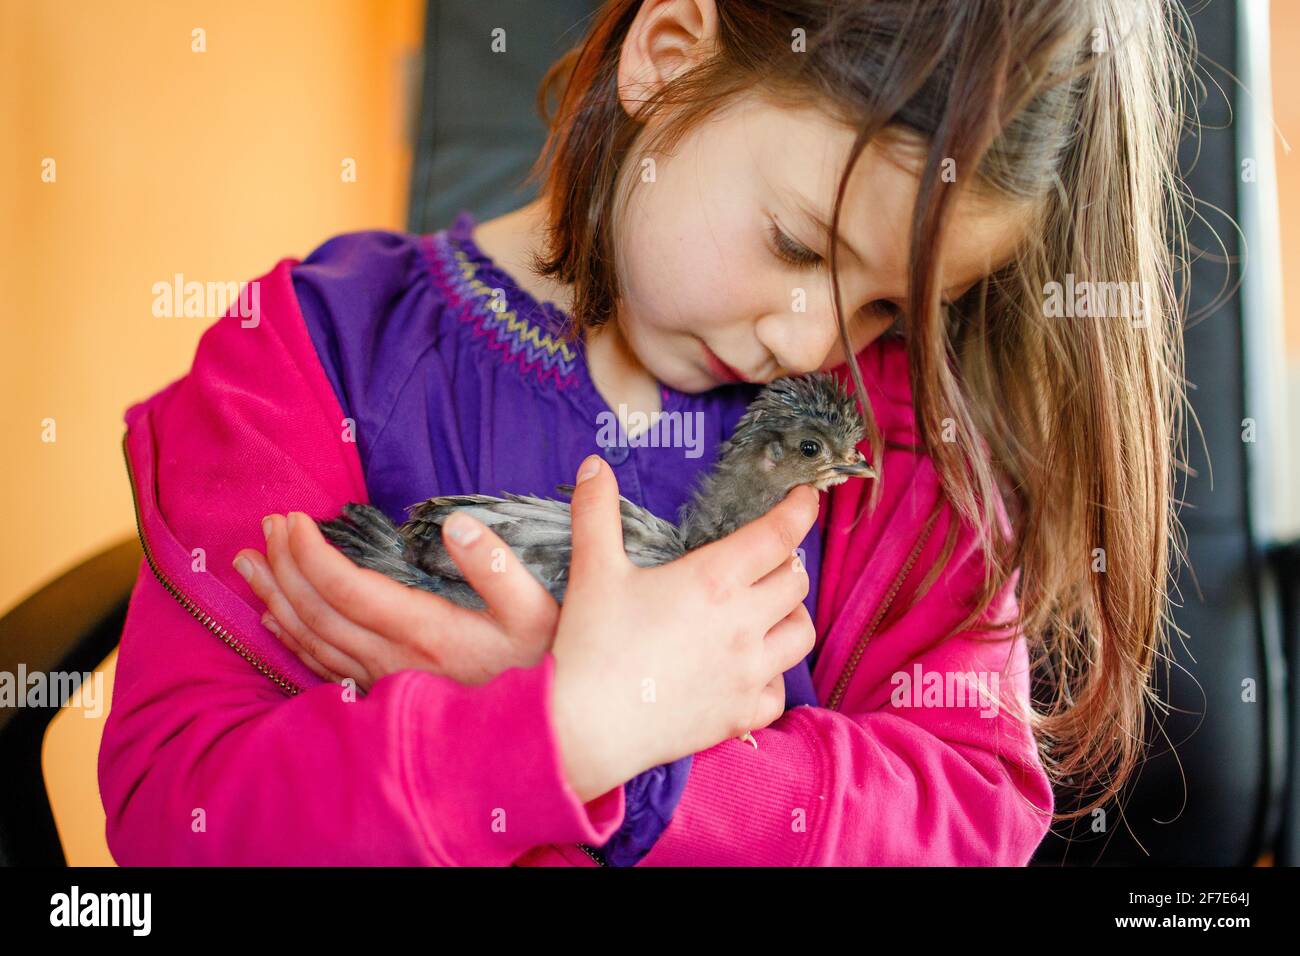 A cute little girl cradles a small baby chicken in her arms inside Stock Photo